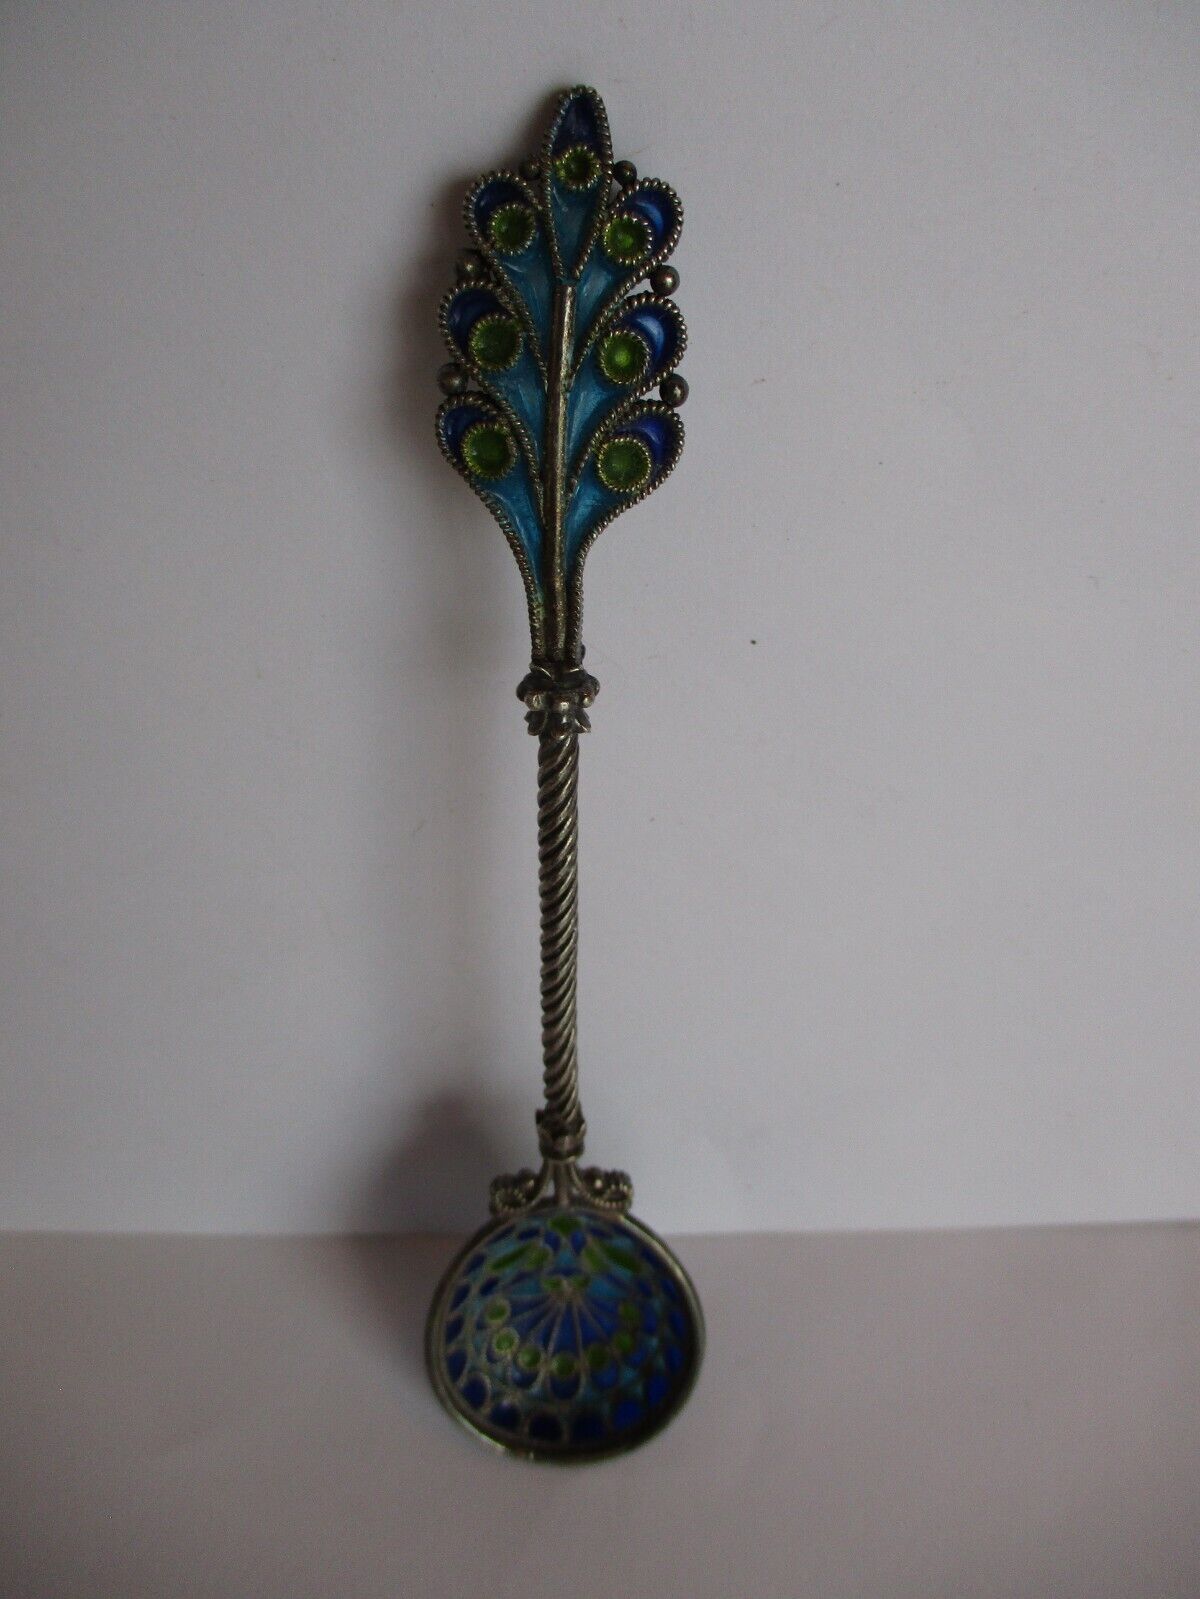 Collectible Antique Cloisonne Swirled Stem Spoon Russian?